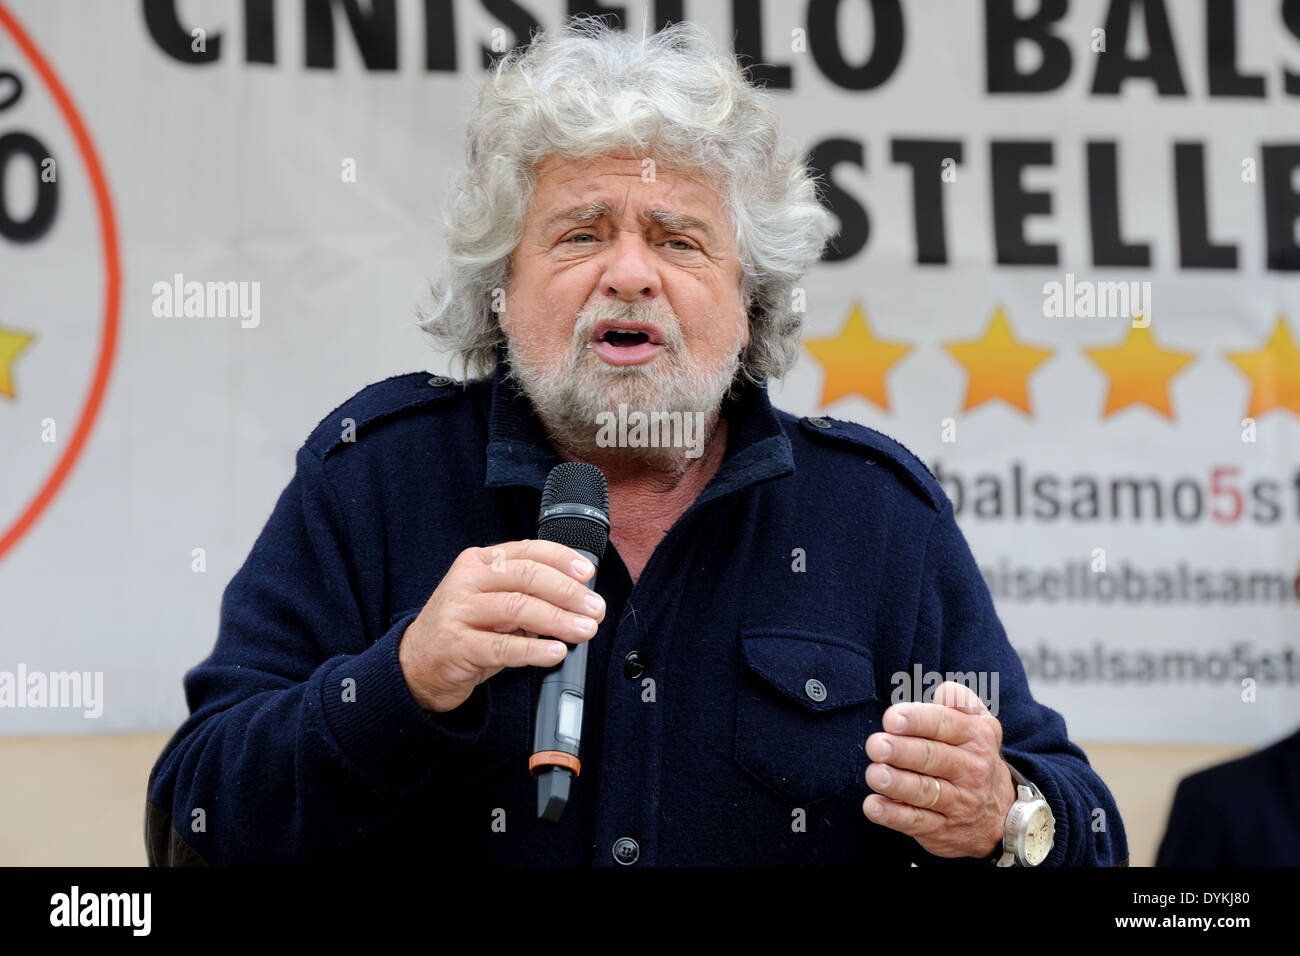 Beppe Grillo during a political meeting in a square (five stars movement), close-up. Stock Photo